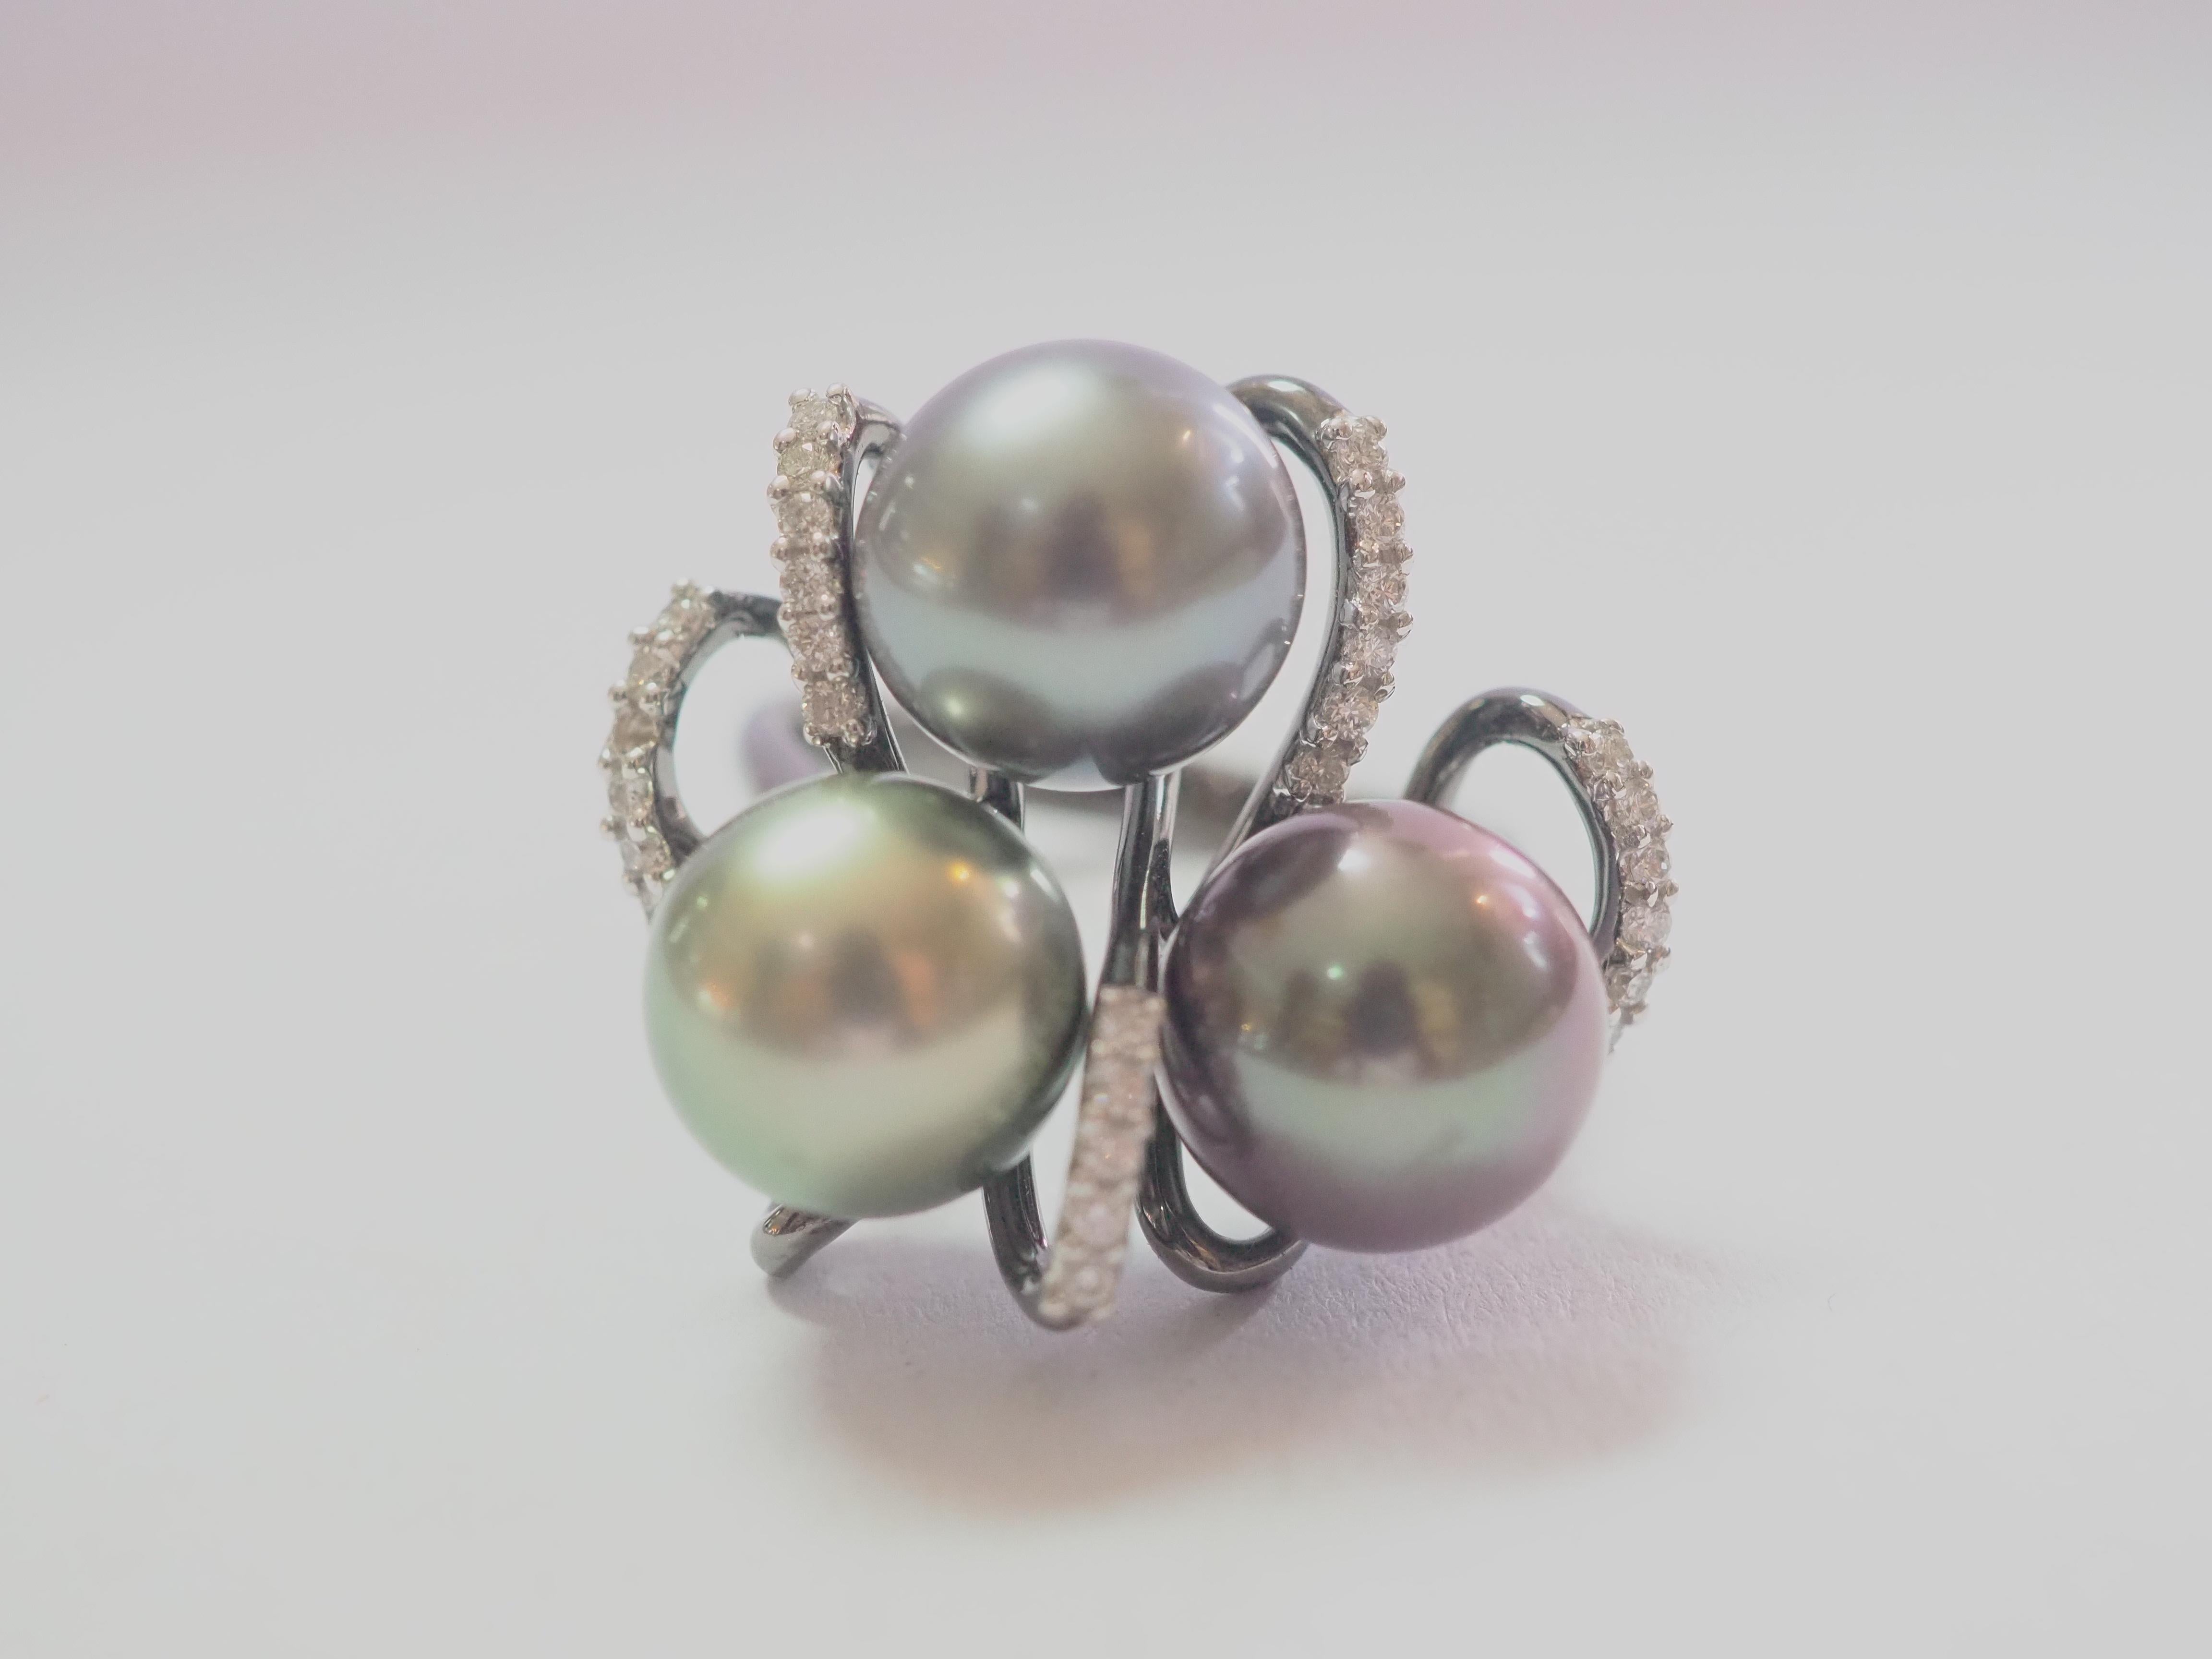 Auction Estimate:
$1,600 - $3,500

This brilliant ring is adorned with 3 rare and beautiful Tahitian pearls! The pearls are perfectly round and has little to no visible blemishes. The color has different of black including brownish, metallic and